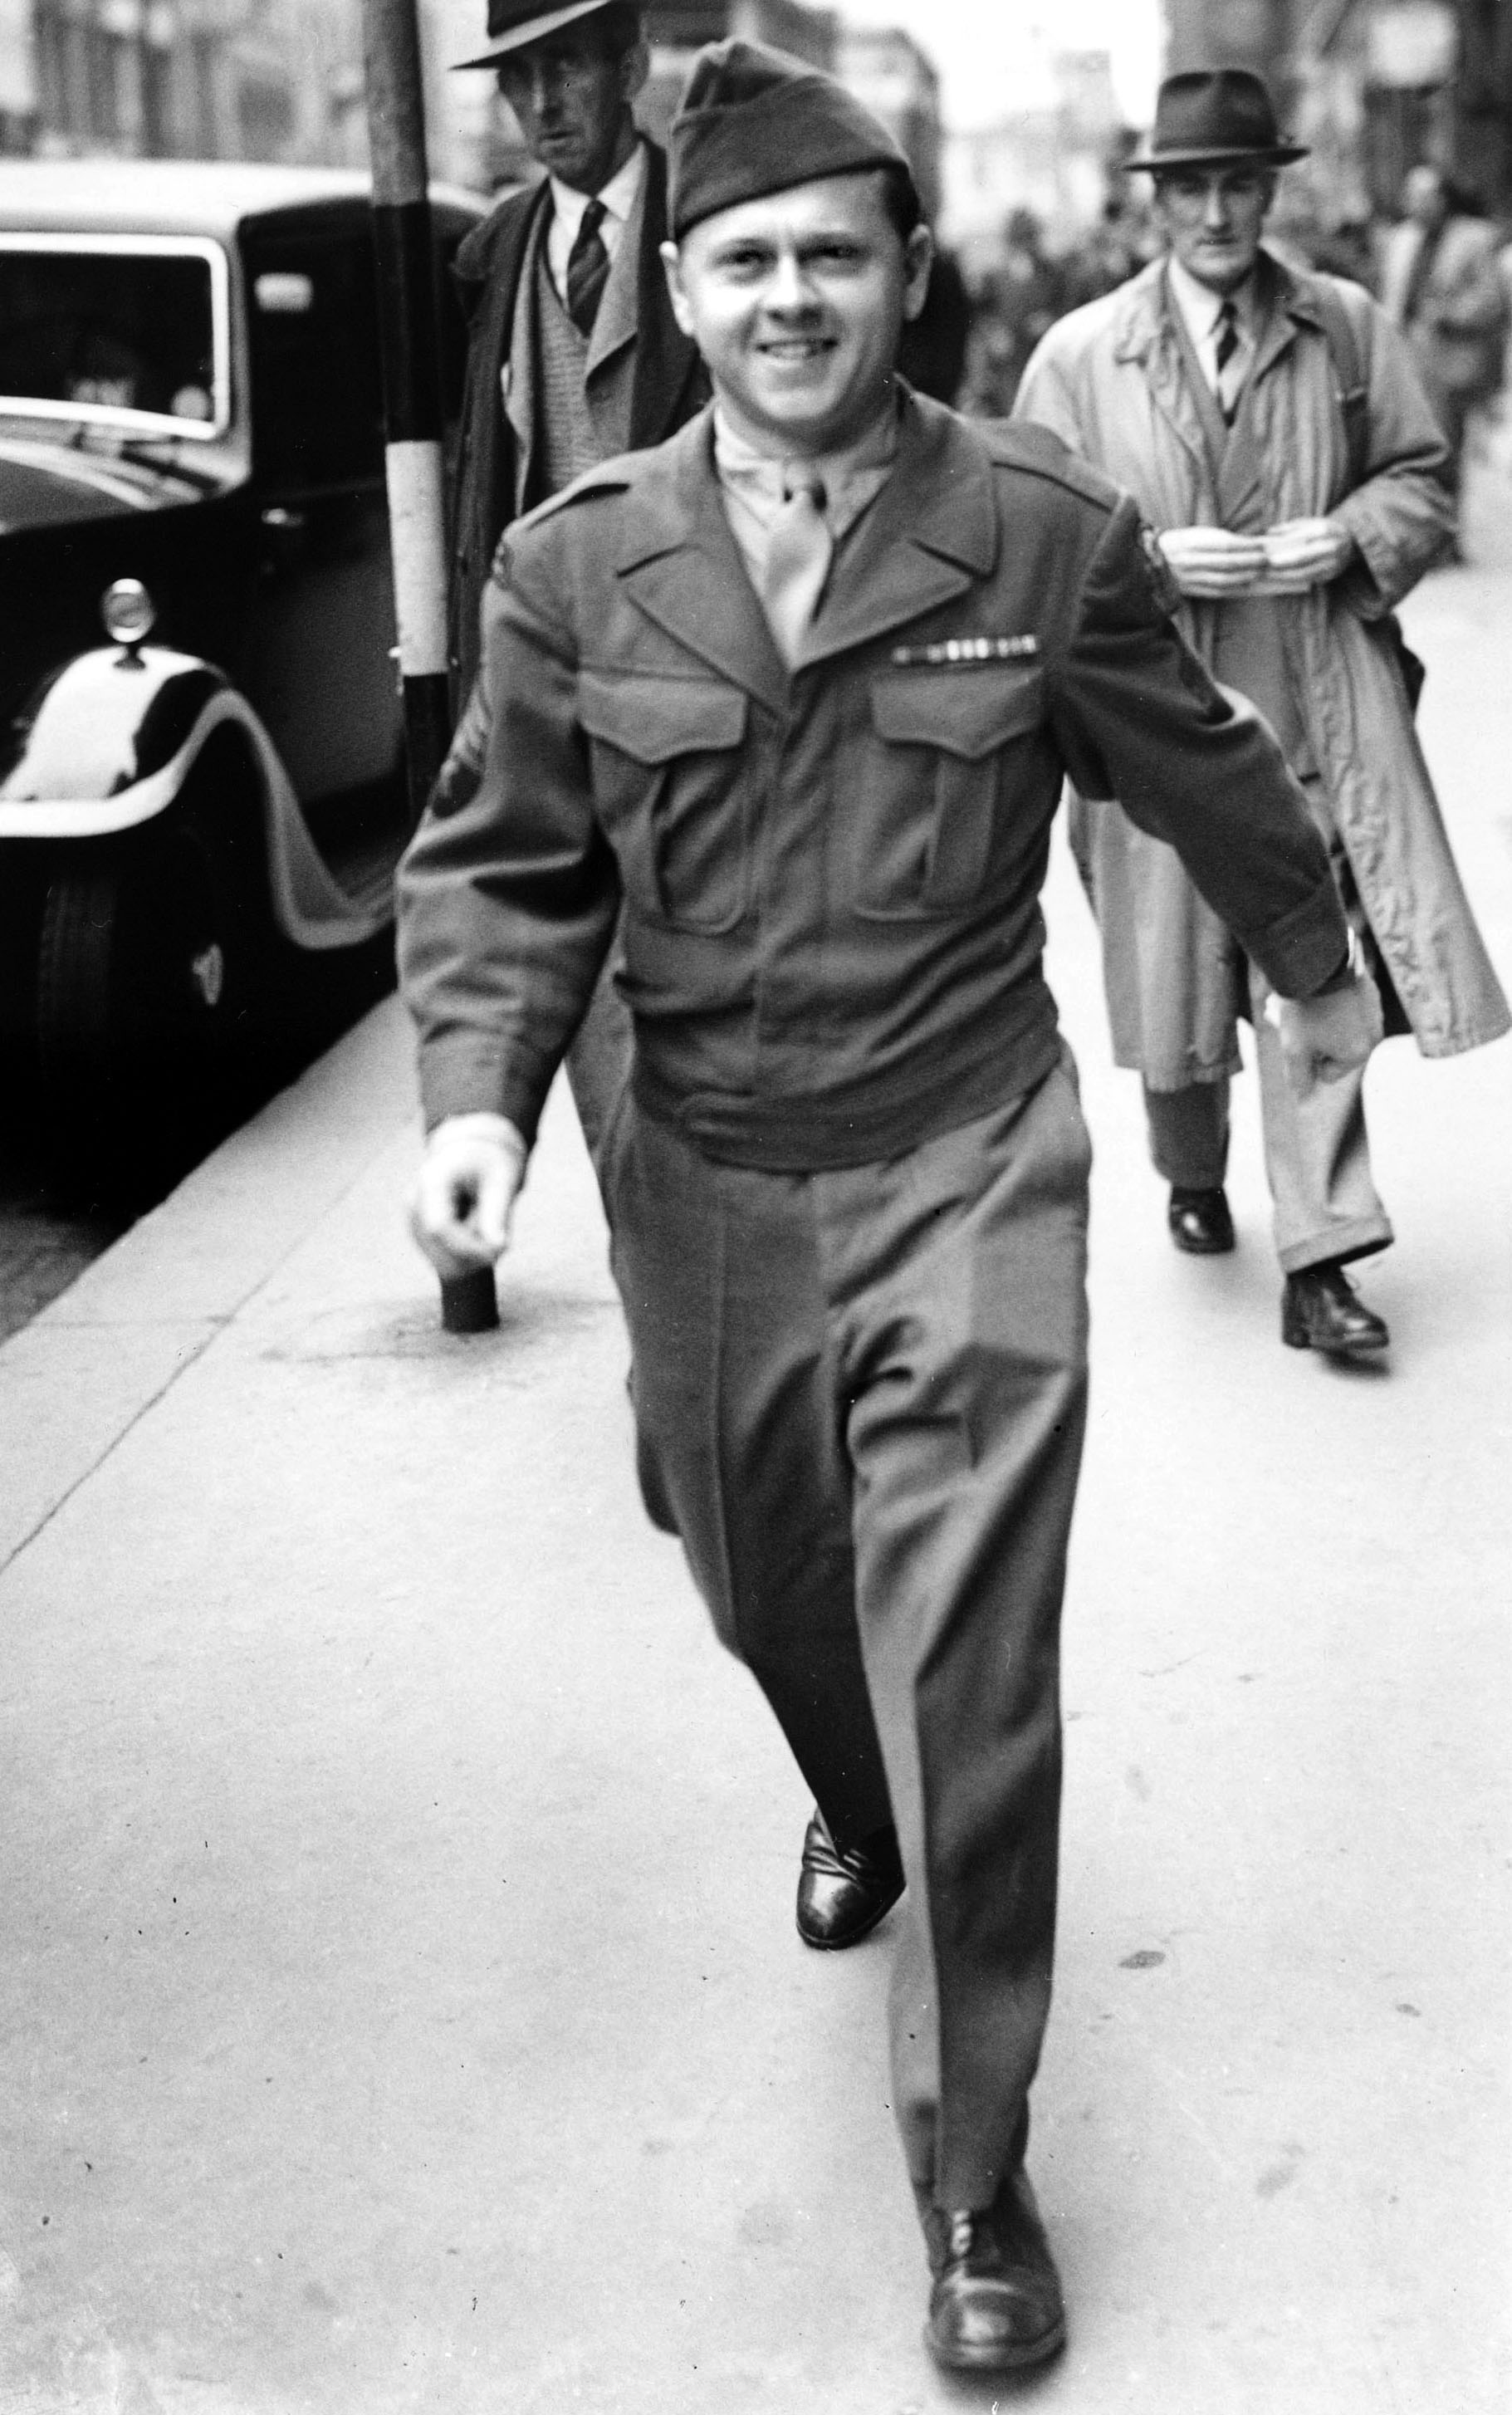 World War II, London, England, 11th August 1945, American film actor and army sergeant Mickey Rooney walks down a pavement watched by bystanders